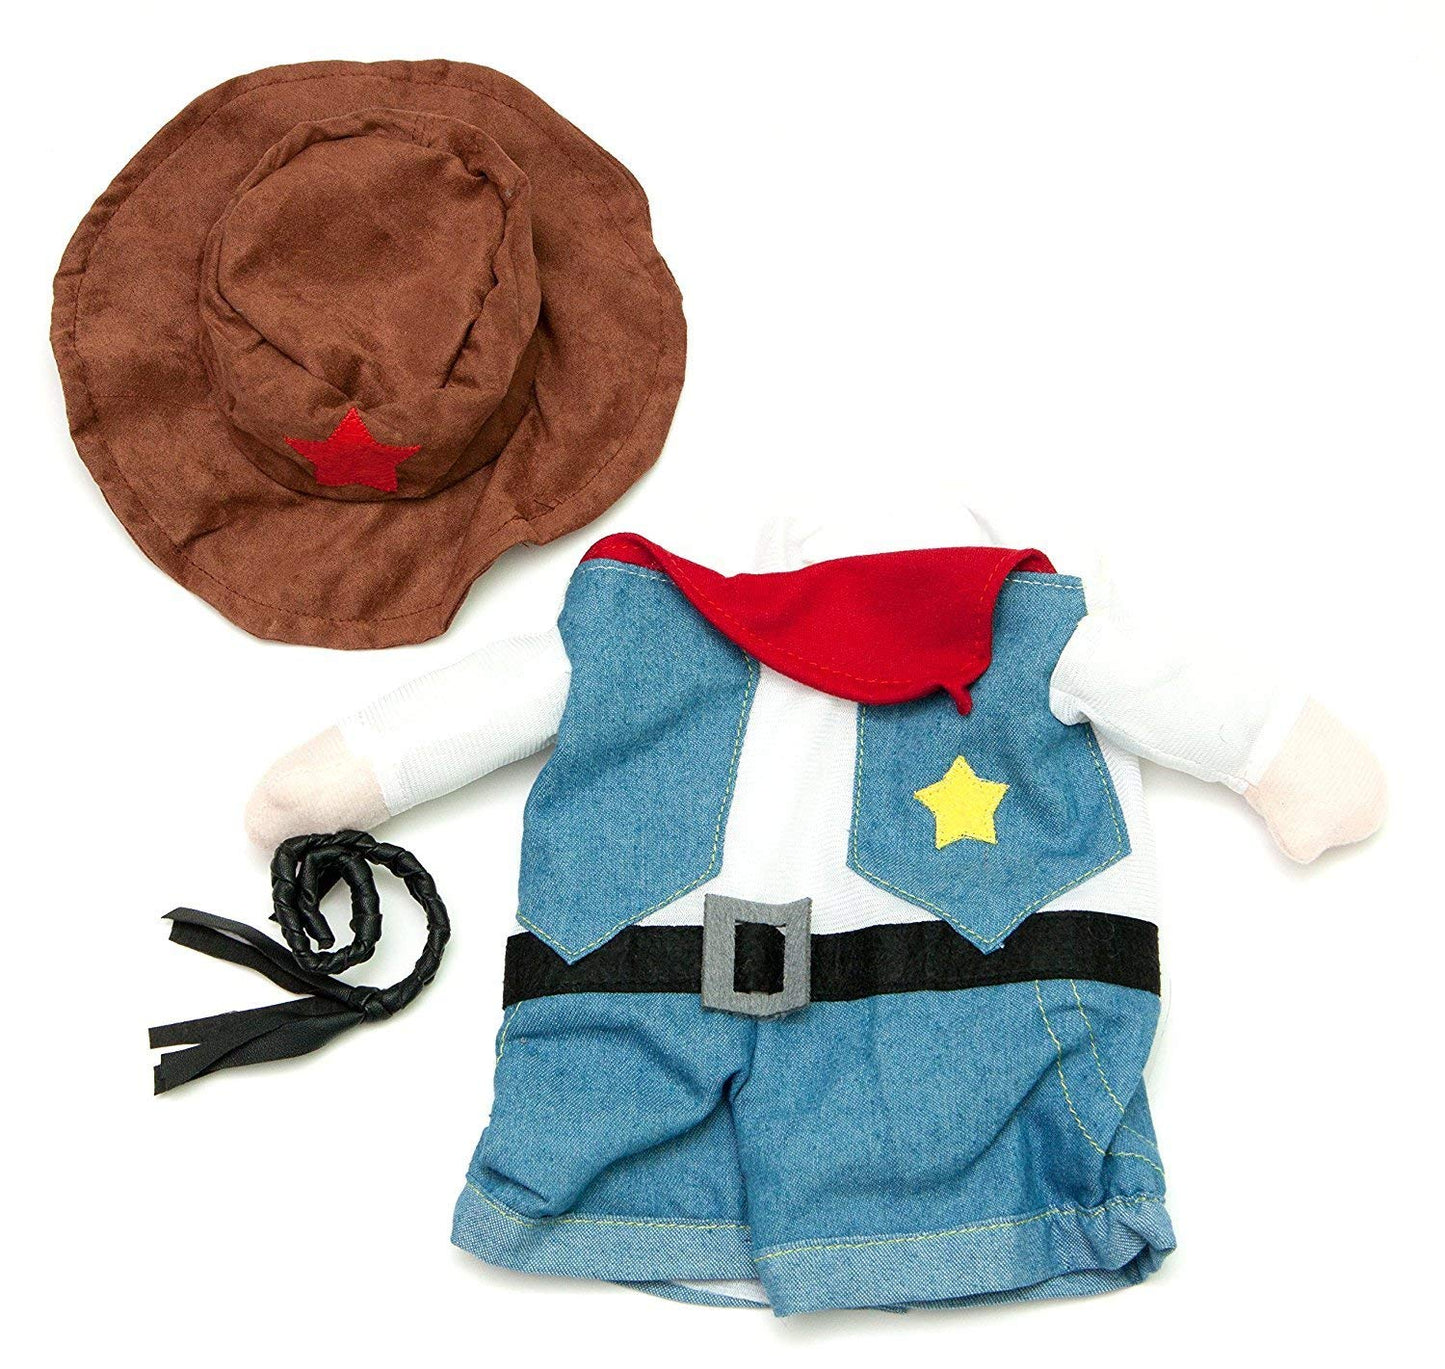 Midlee Fake Arms Cowboy Costume for Small Dogs